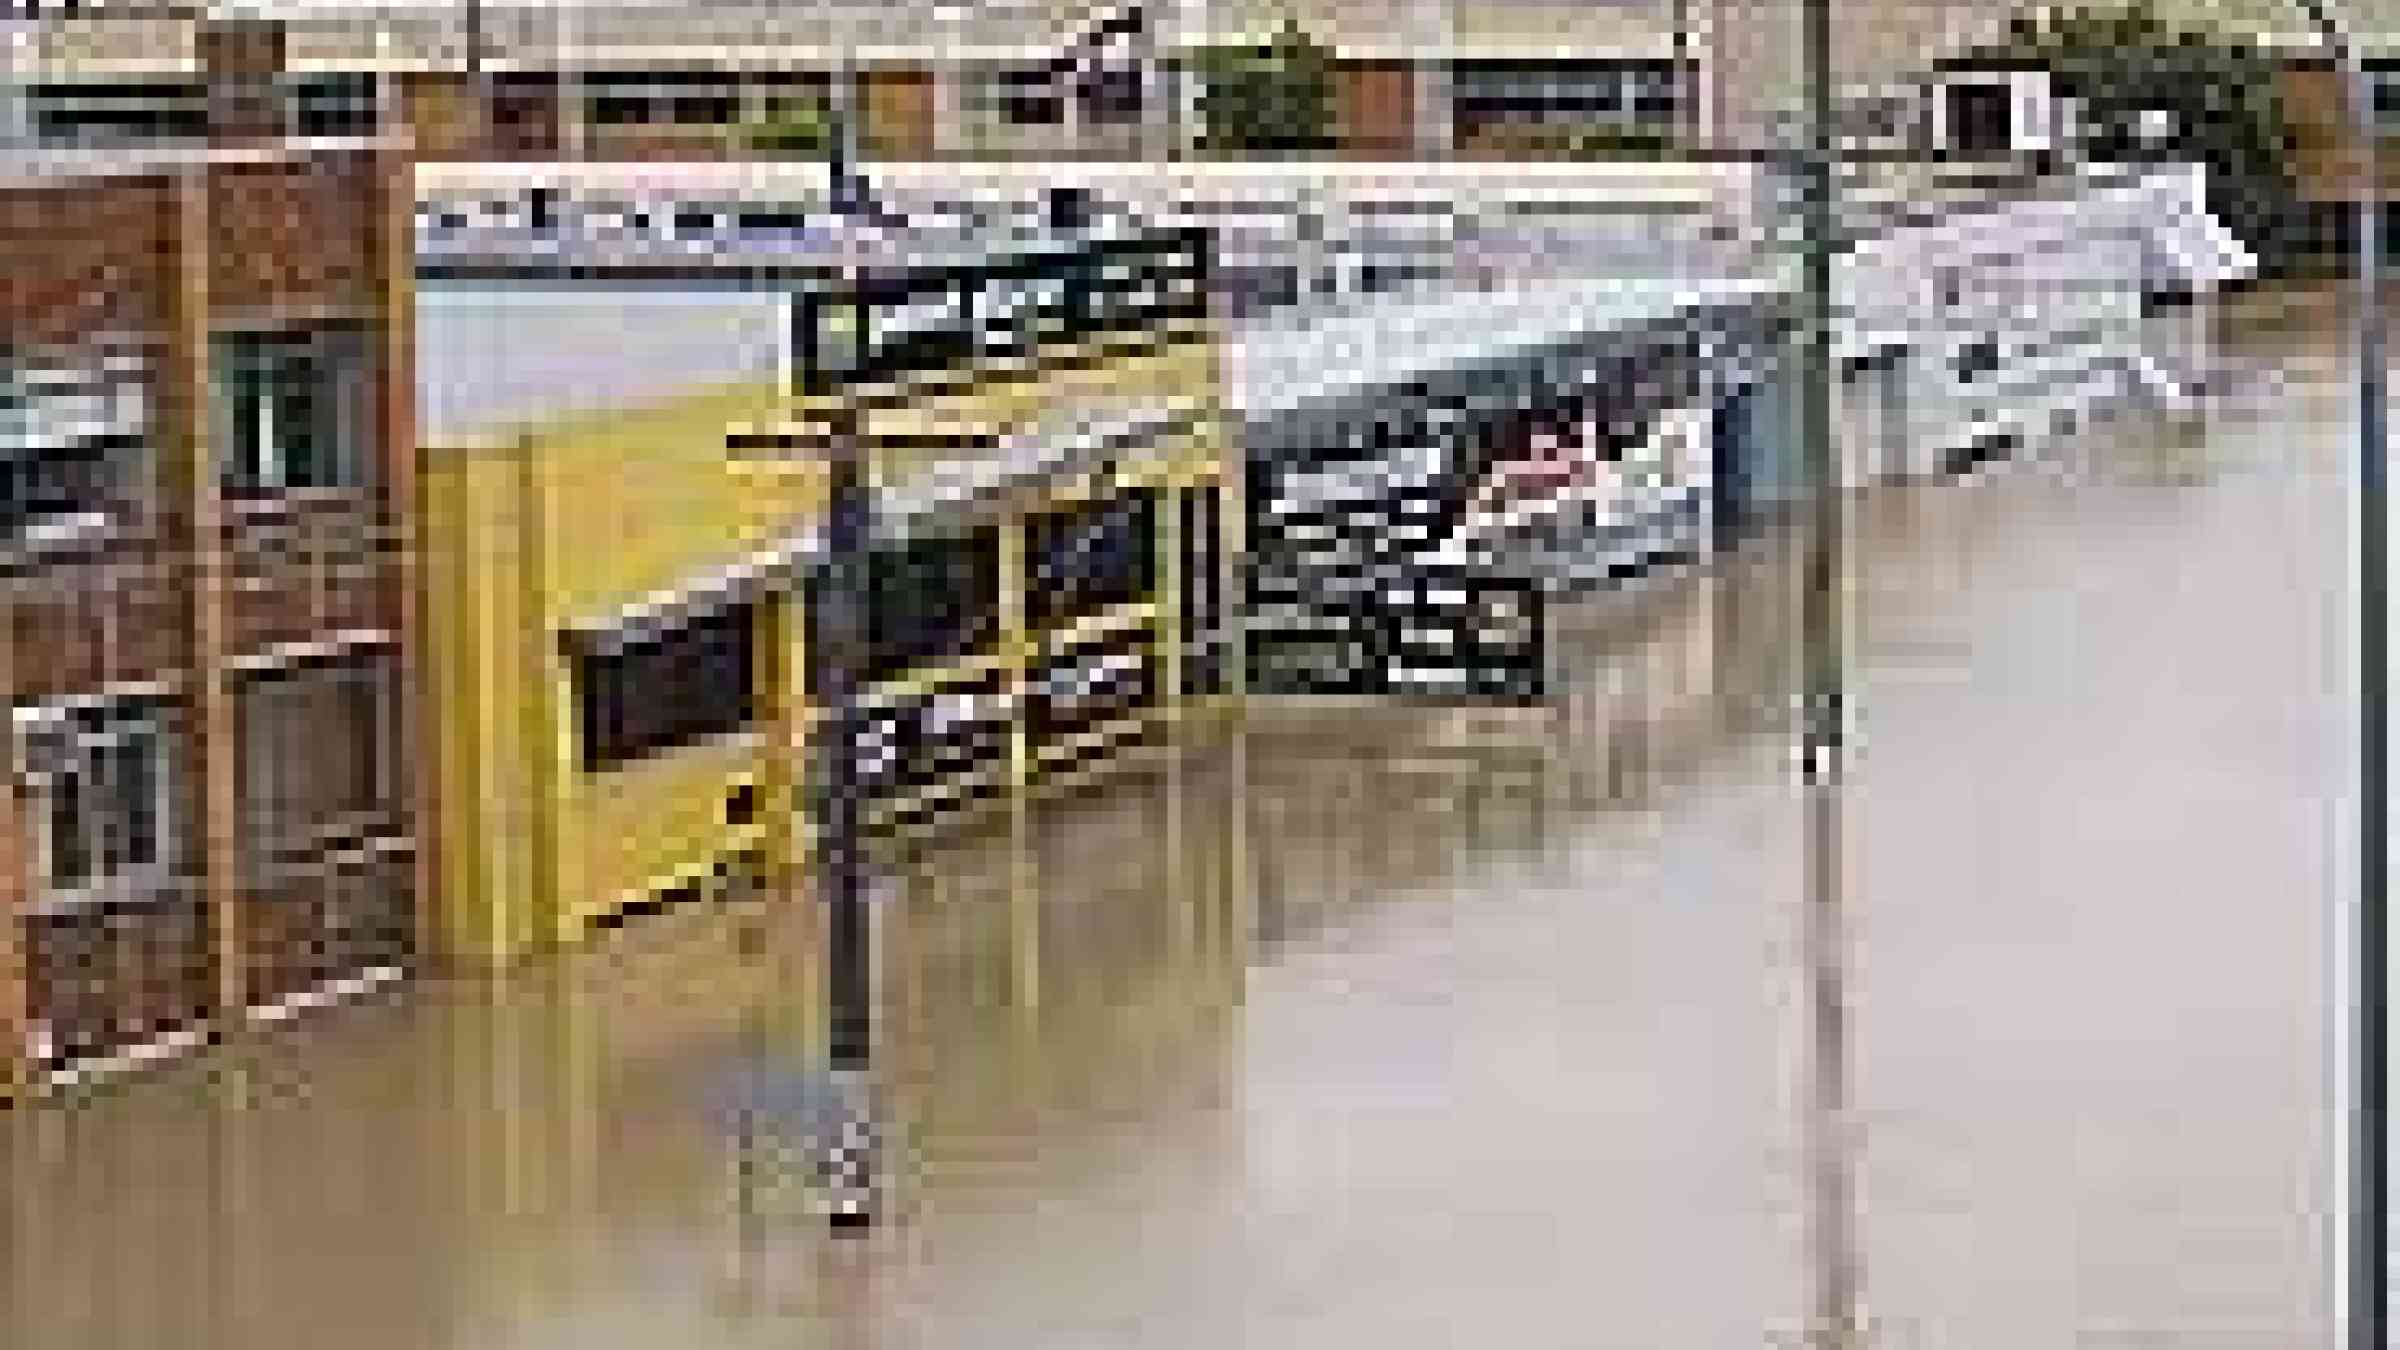 Photo of the floods in Brisbane by Erik K. Veland, Creative Commons Attribution-NonCommercial 2.0 Generic  (CC BY-NC 2.0)